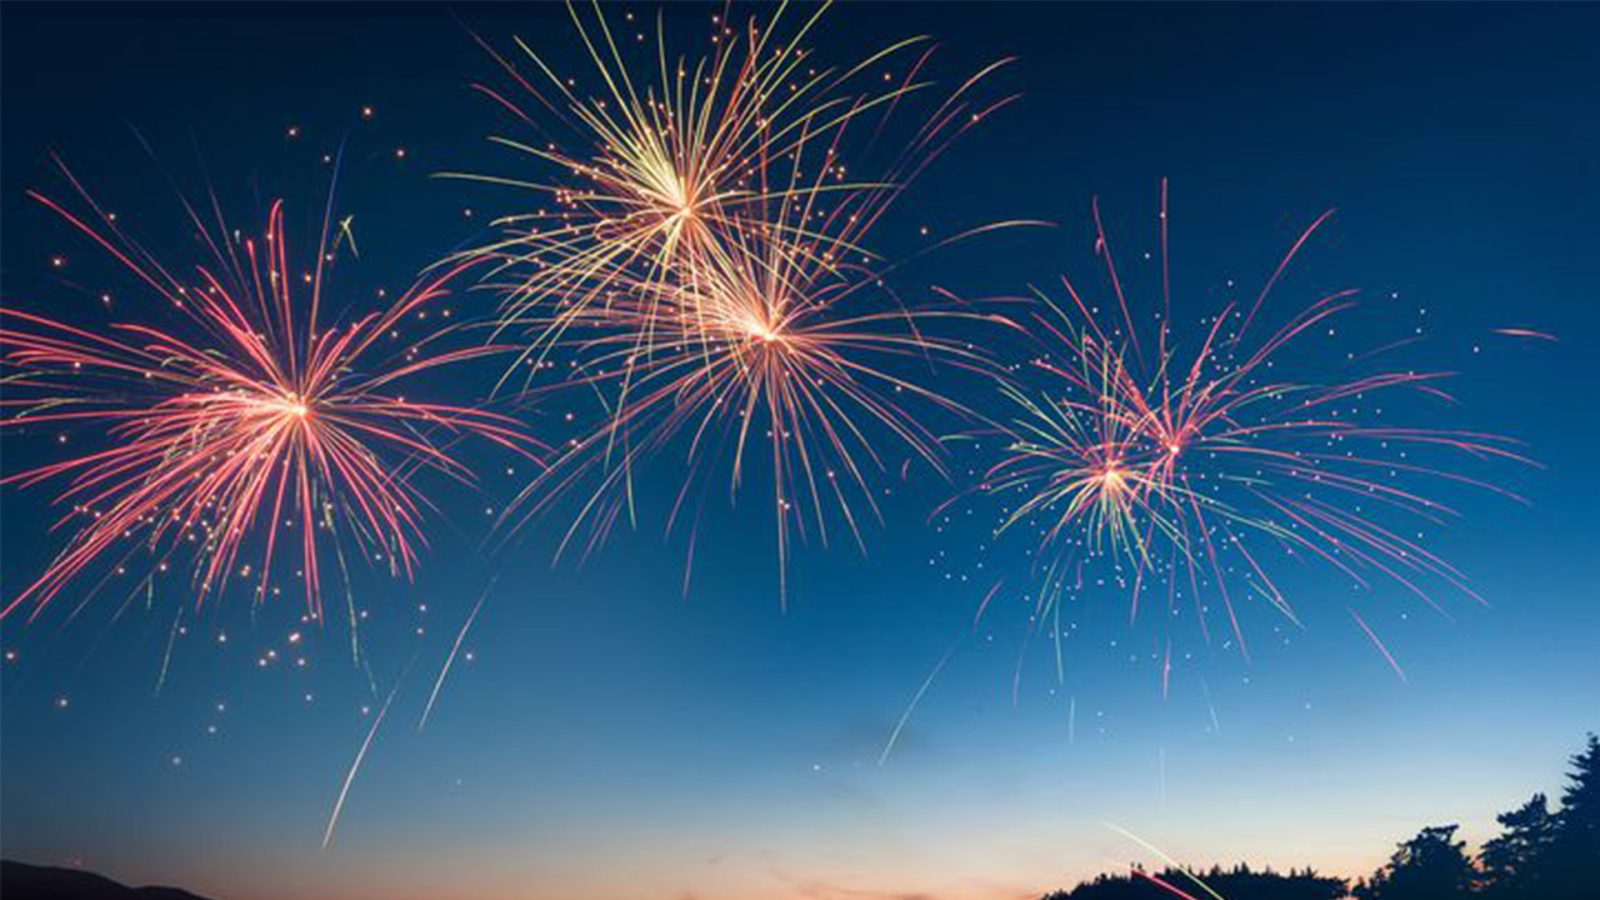 Keep your drone grounded around fireworks on the 4th of July